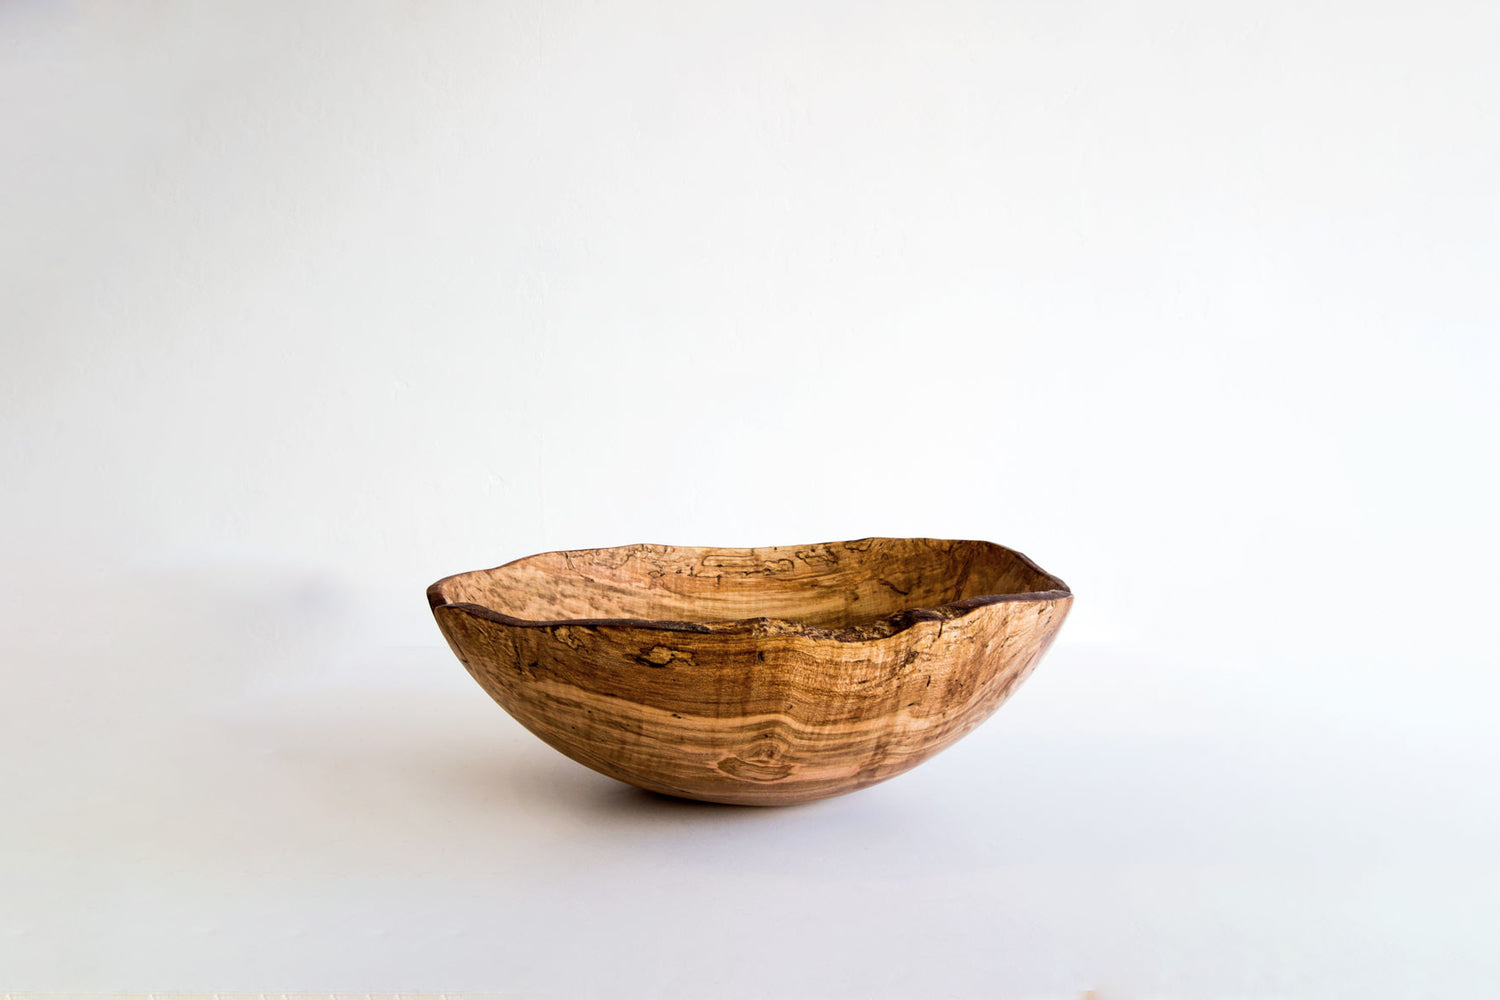 the peterman splated maple oval bowl in the 10 inch size is $90 at lost & 22